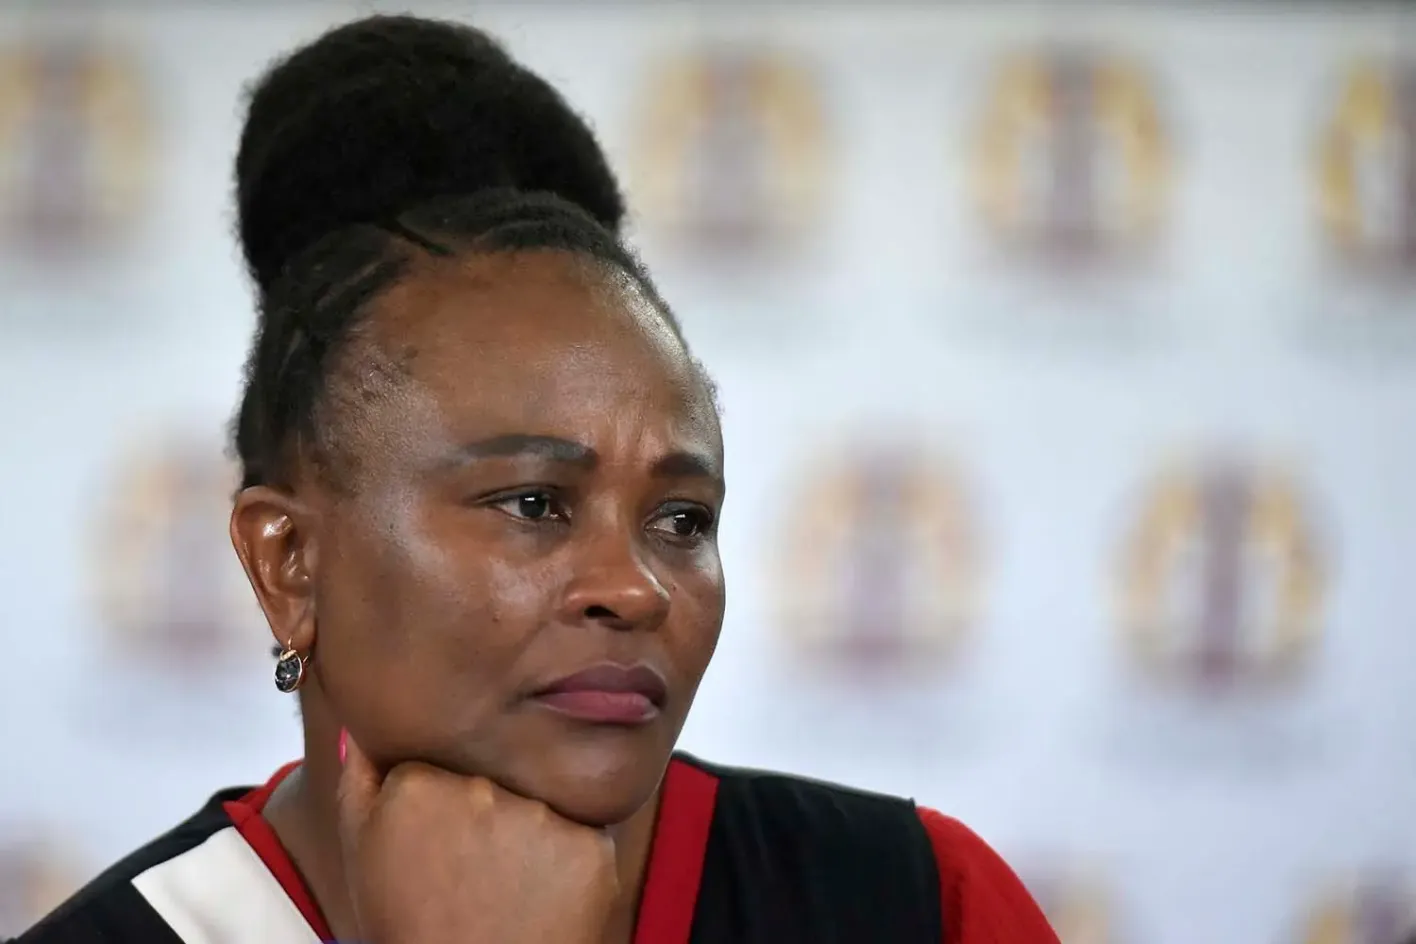 Busisiwe Mkhwebane allegedly offered ex-employee millions to vacate office